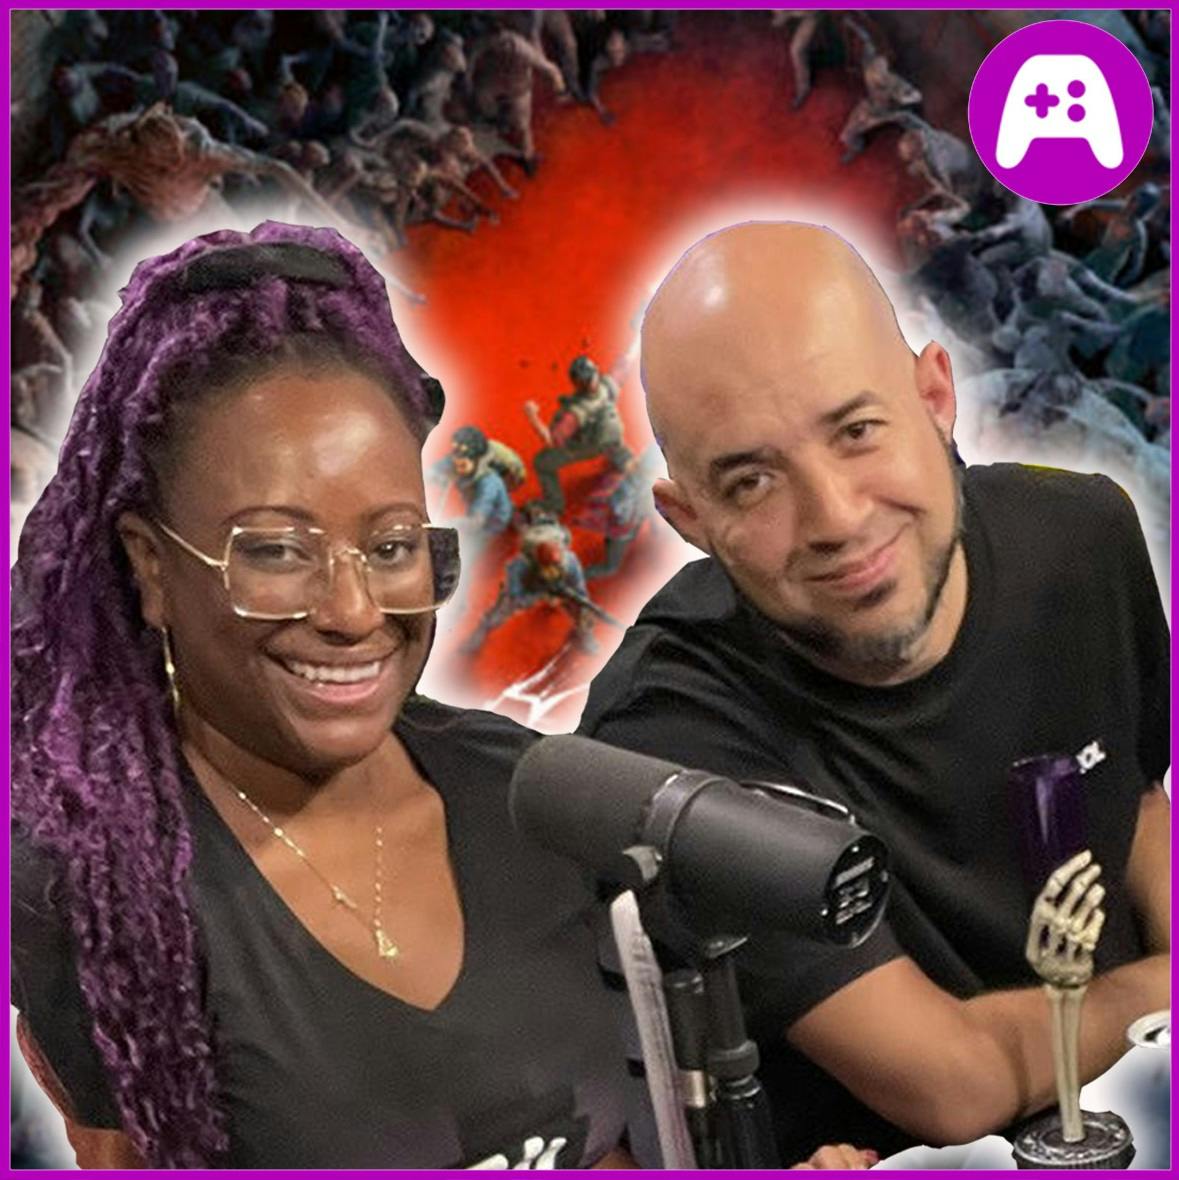 Back 4 Blood Hands-On With Riana Manuel and Danny Peña! – Ep. 245